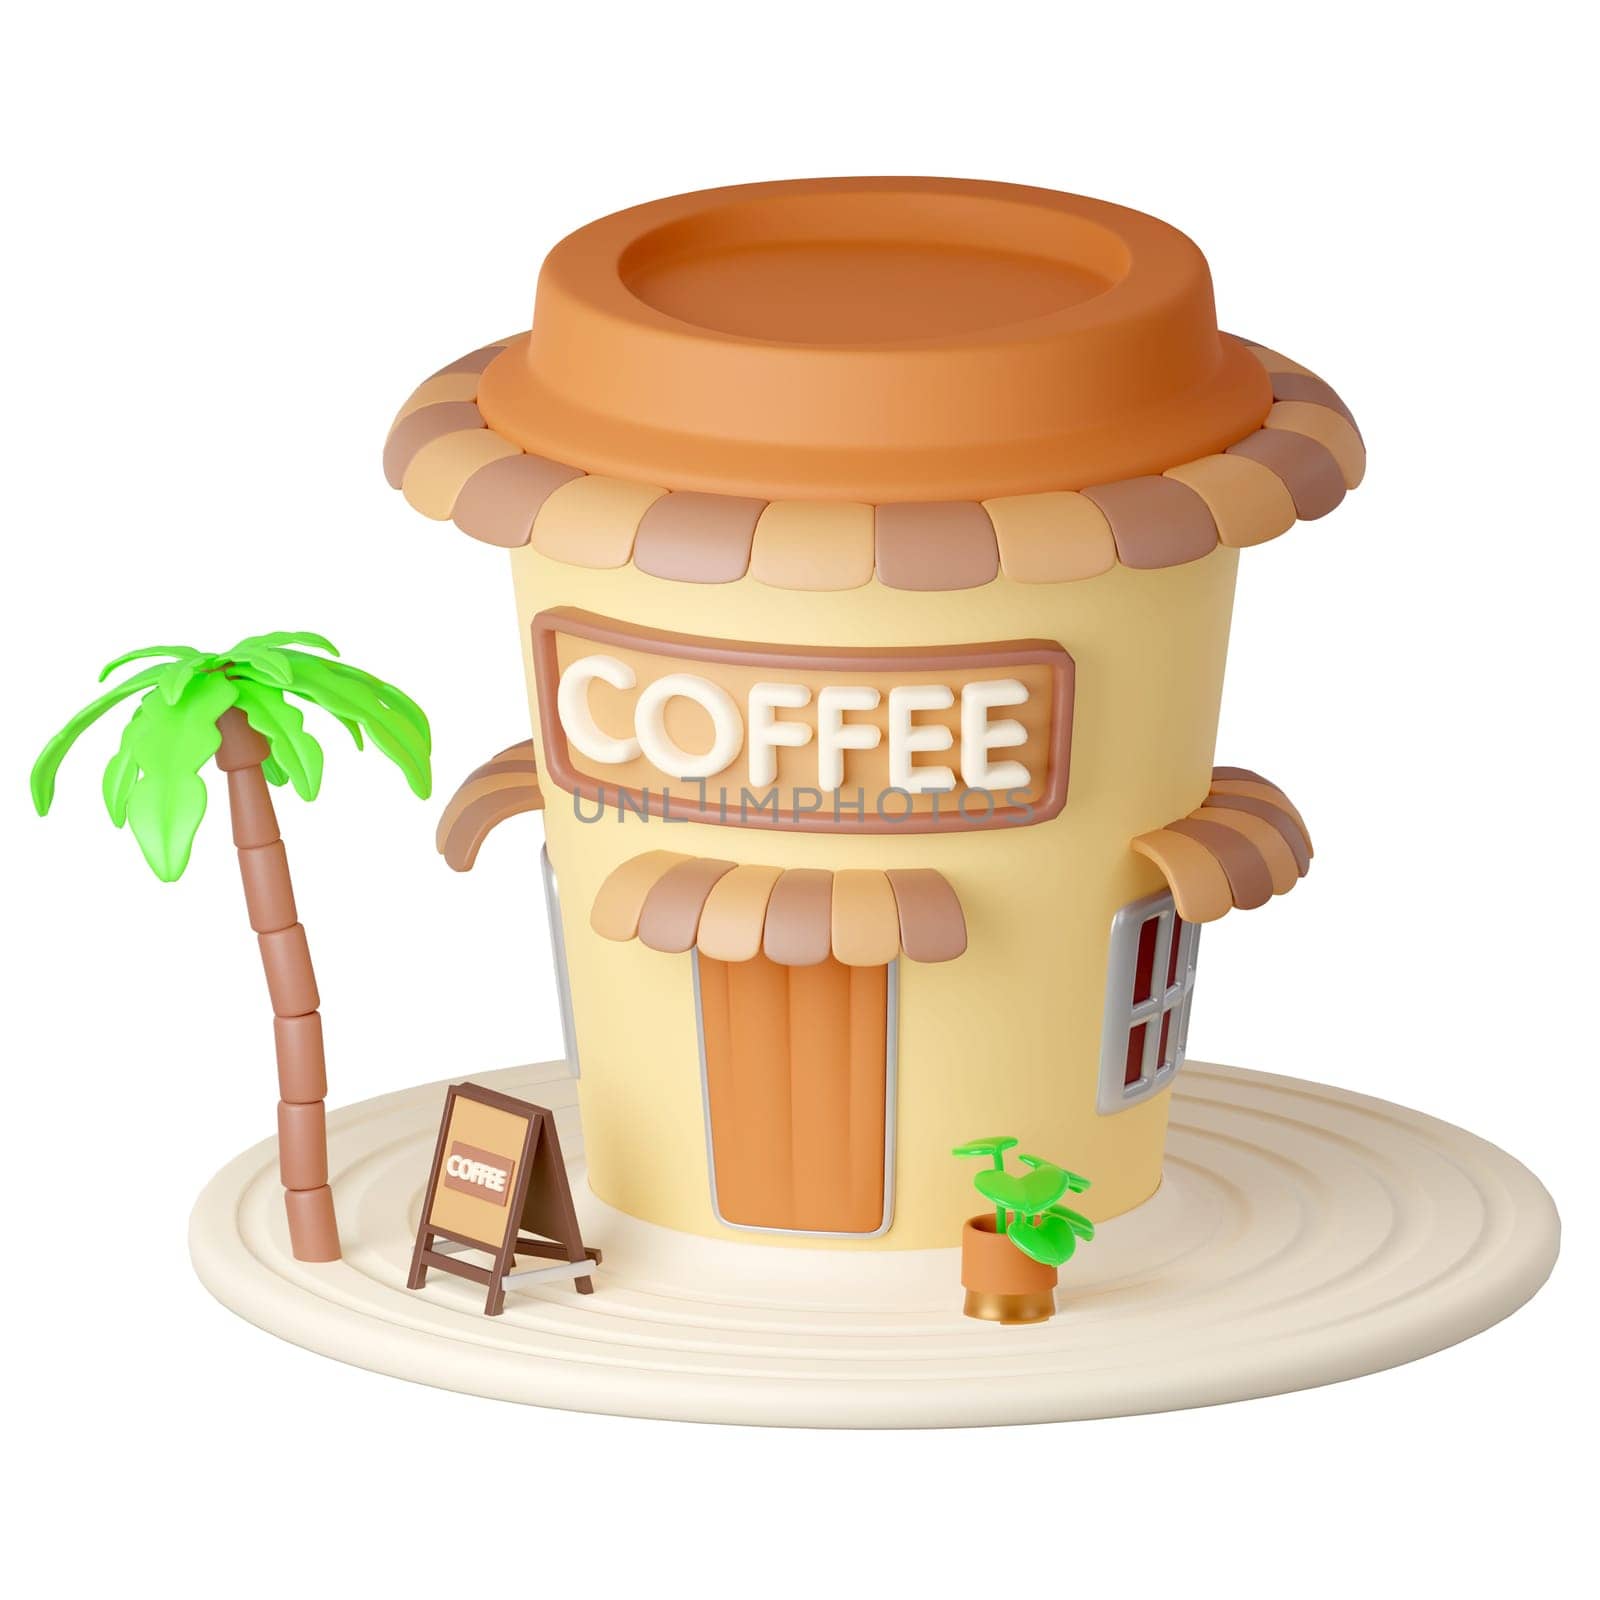 Coffee Shop a cup of coffee 3d illustration.